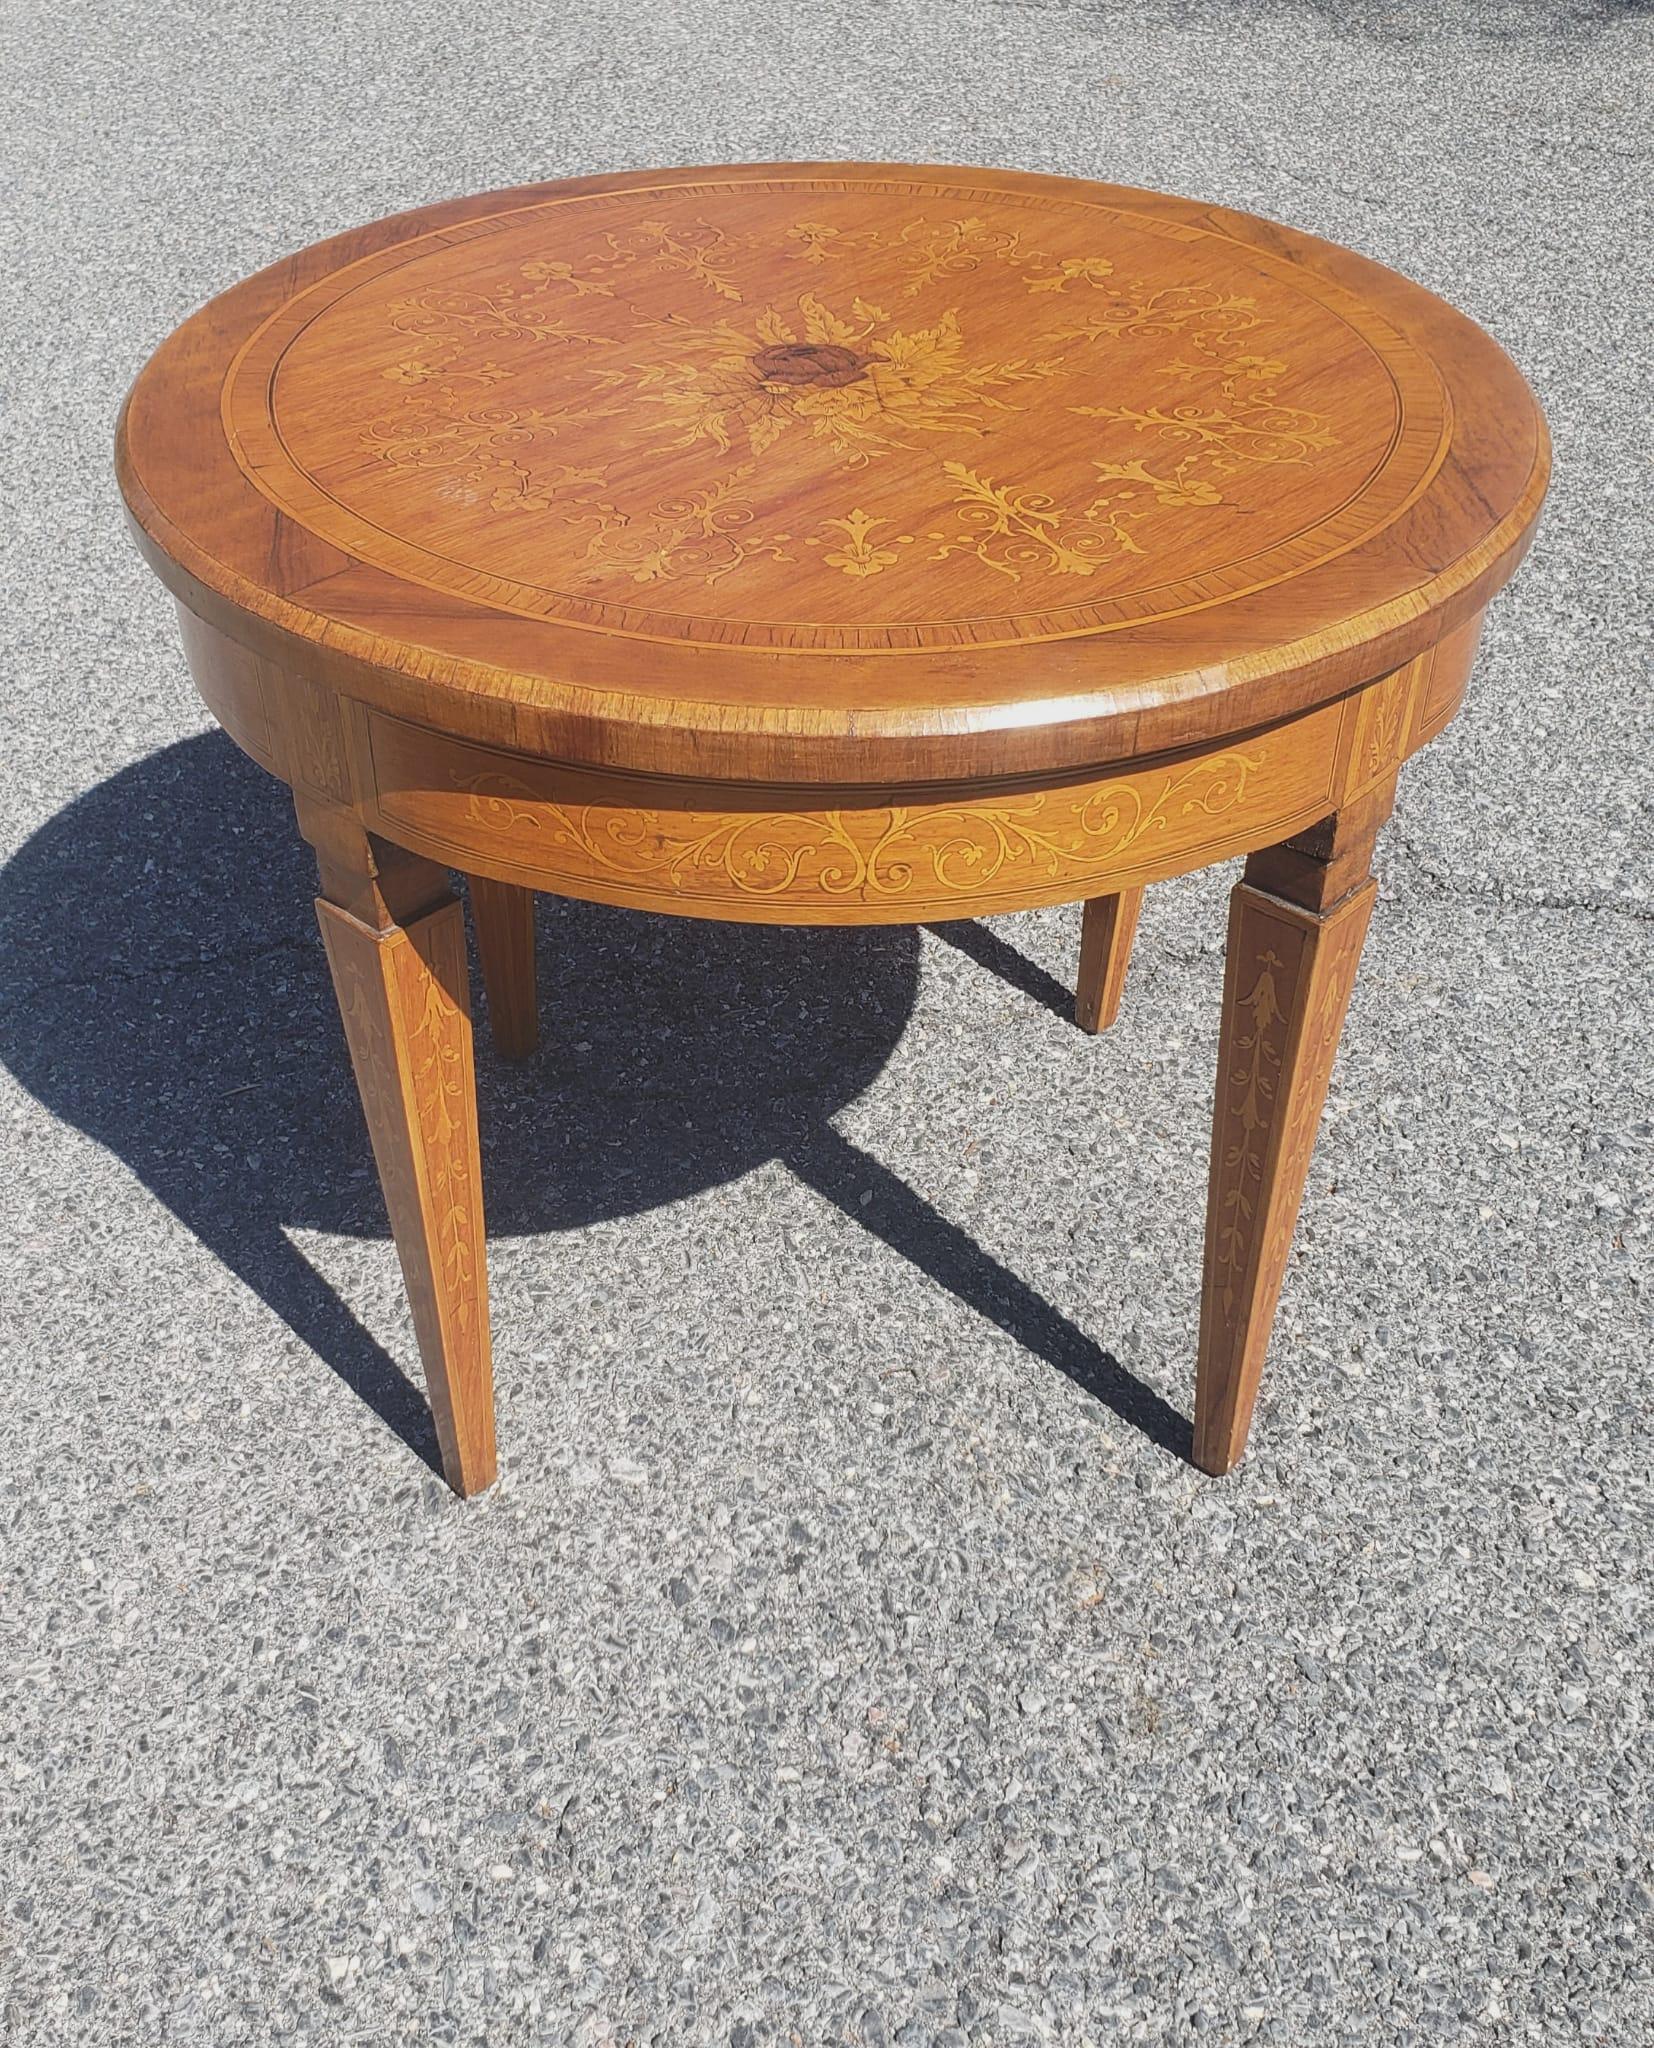 An Early 20th century Dutch Colonial Style Marquetry mixed Fruitwoods Gueridon Table in good antique condition. 
fine Marquetry work throught the top and and all legs. Measures 25